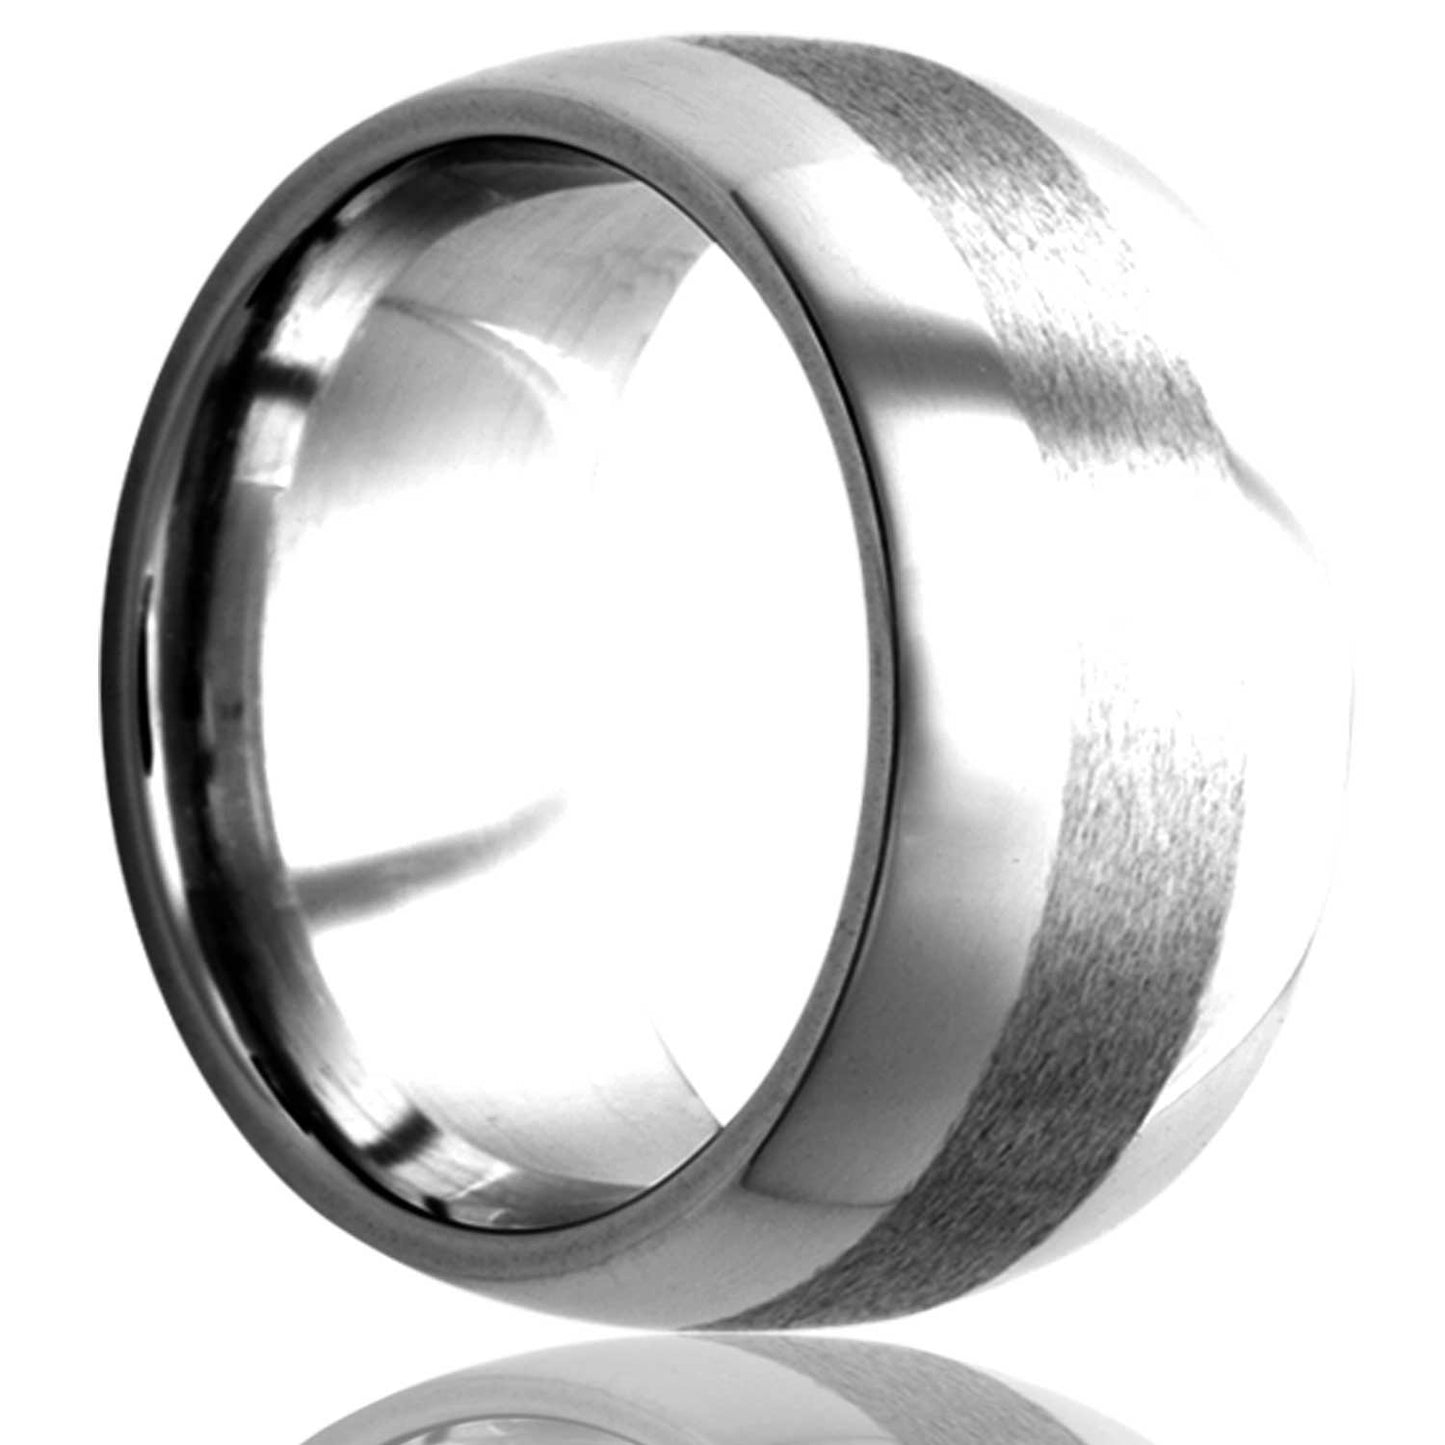 A domed cobalt wedding band with satin finish stripe displayed on a neutral white background.